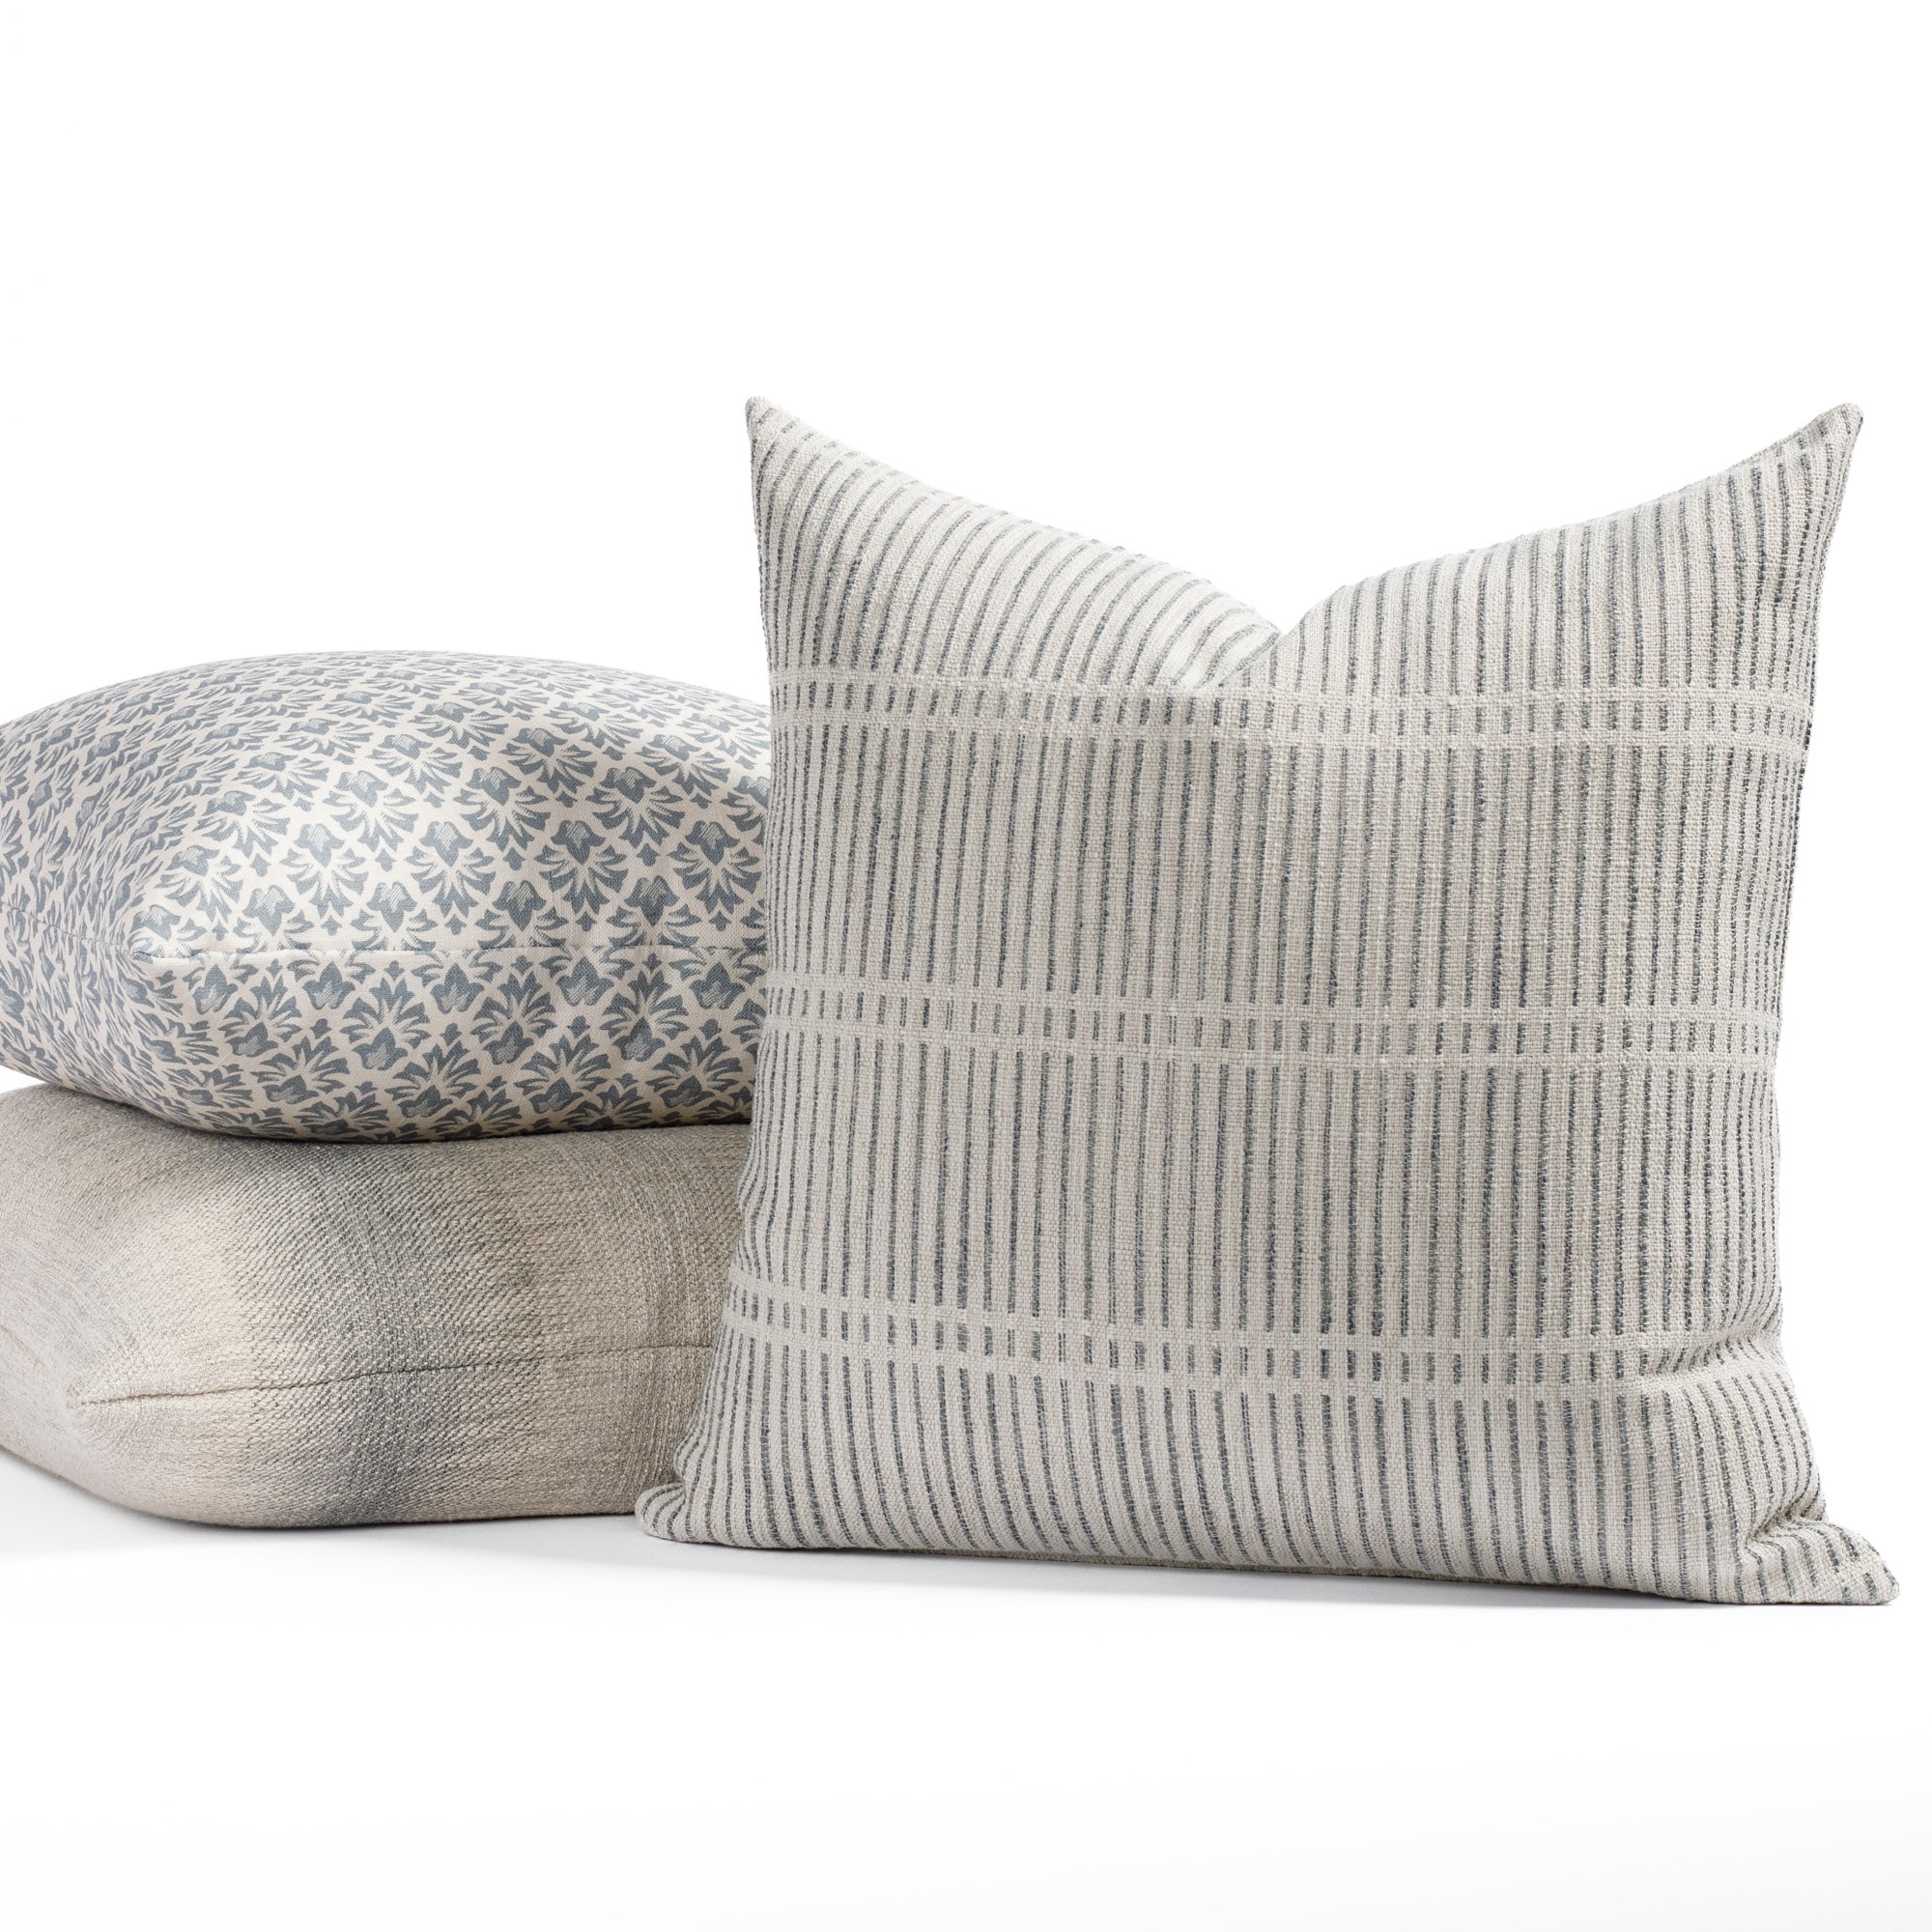 designer blue and cream patterned Tonic Living pillows